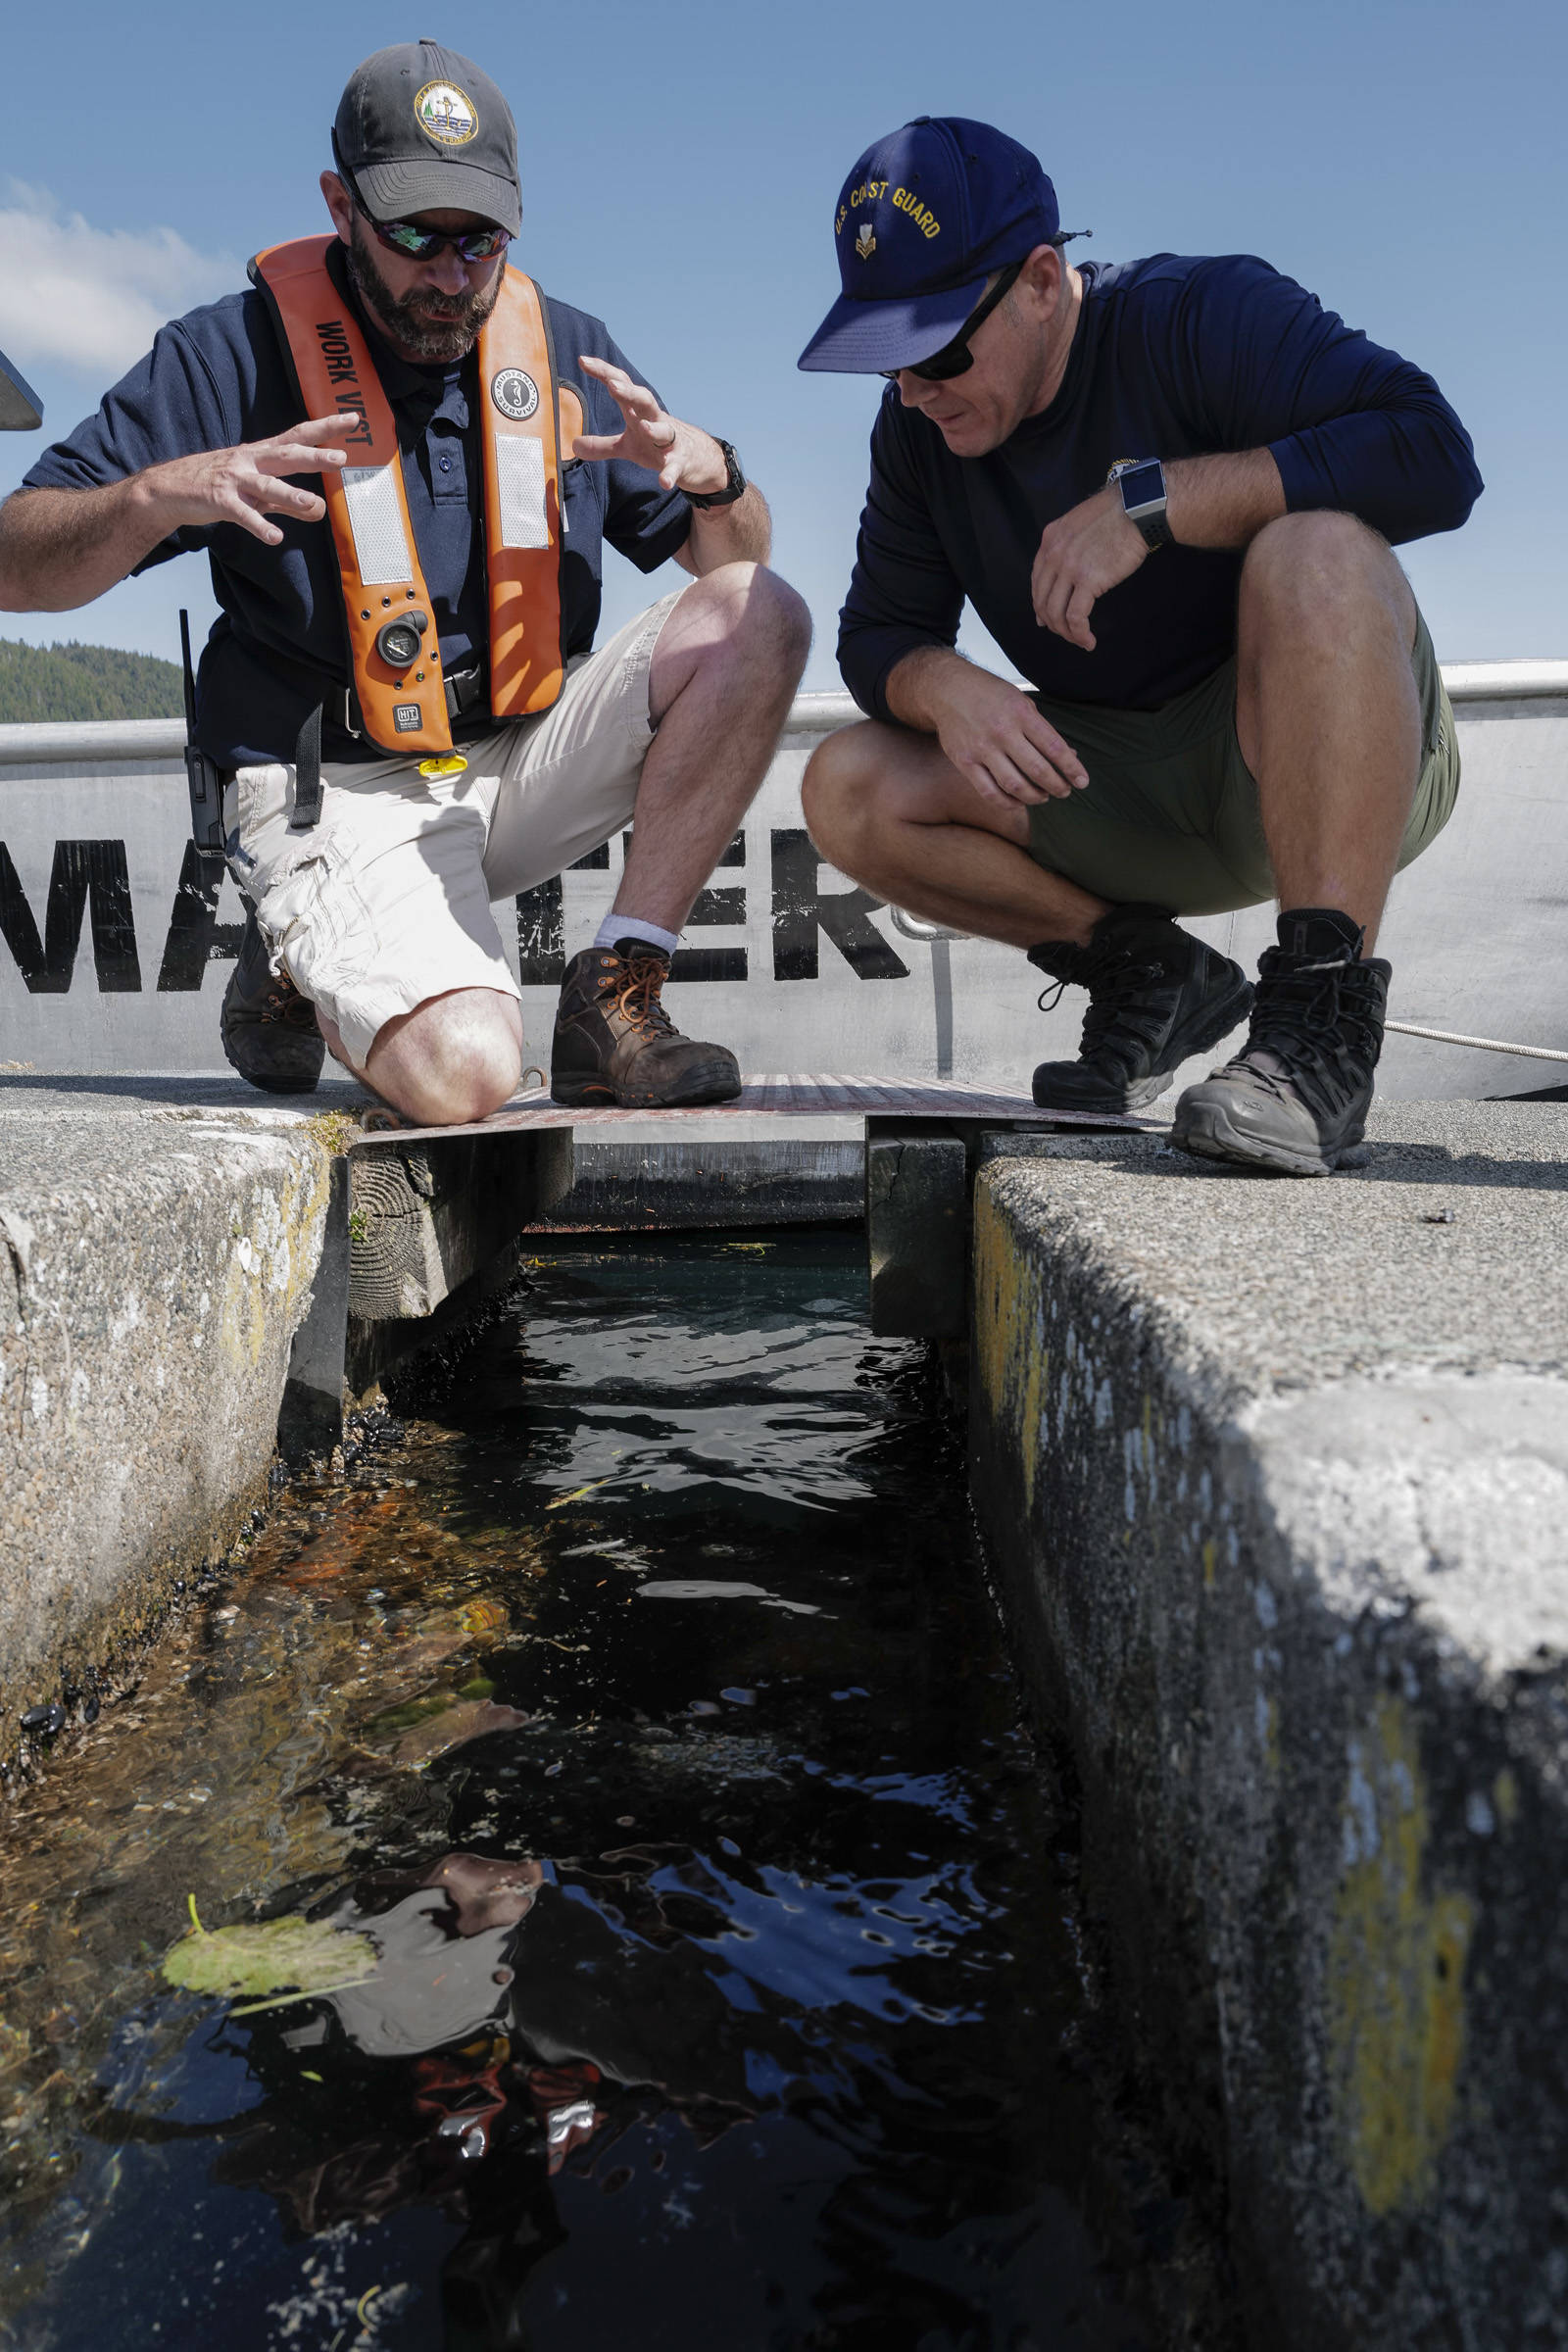 Deputy Harbormaster Matt Creswell, left, explains to the project to Shawn Price, of U.S. Coast Guard Regional Dive Locker West, at the Don D. Statter Boat Harbor in Auke Bay on Friday, Aug. 16, 2019. Members of the U.S. Army’s 74th Engineer Dive Detachment and U.S. Coast Guard Regional Dive Locker West worked together to inspect and replace the bolts holding the harbor’s breakwater together. (Michael Penn | Juneau Empire)